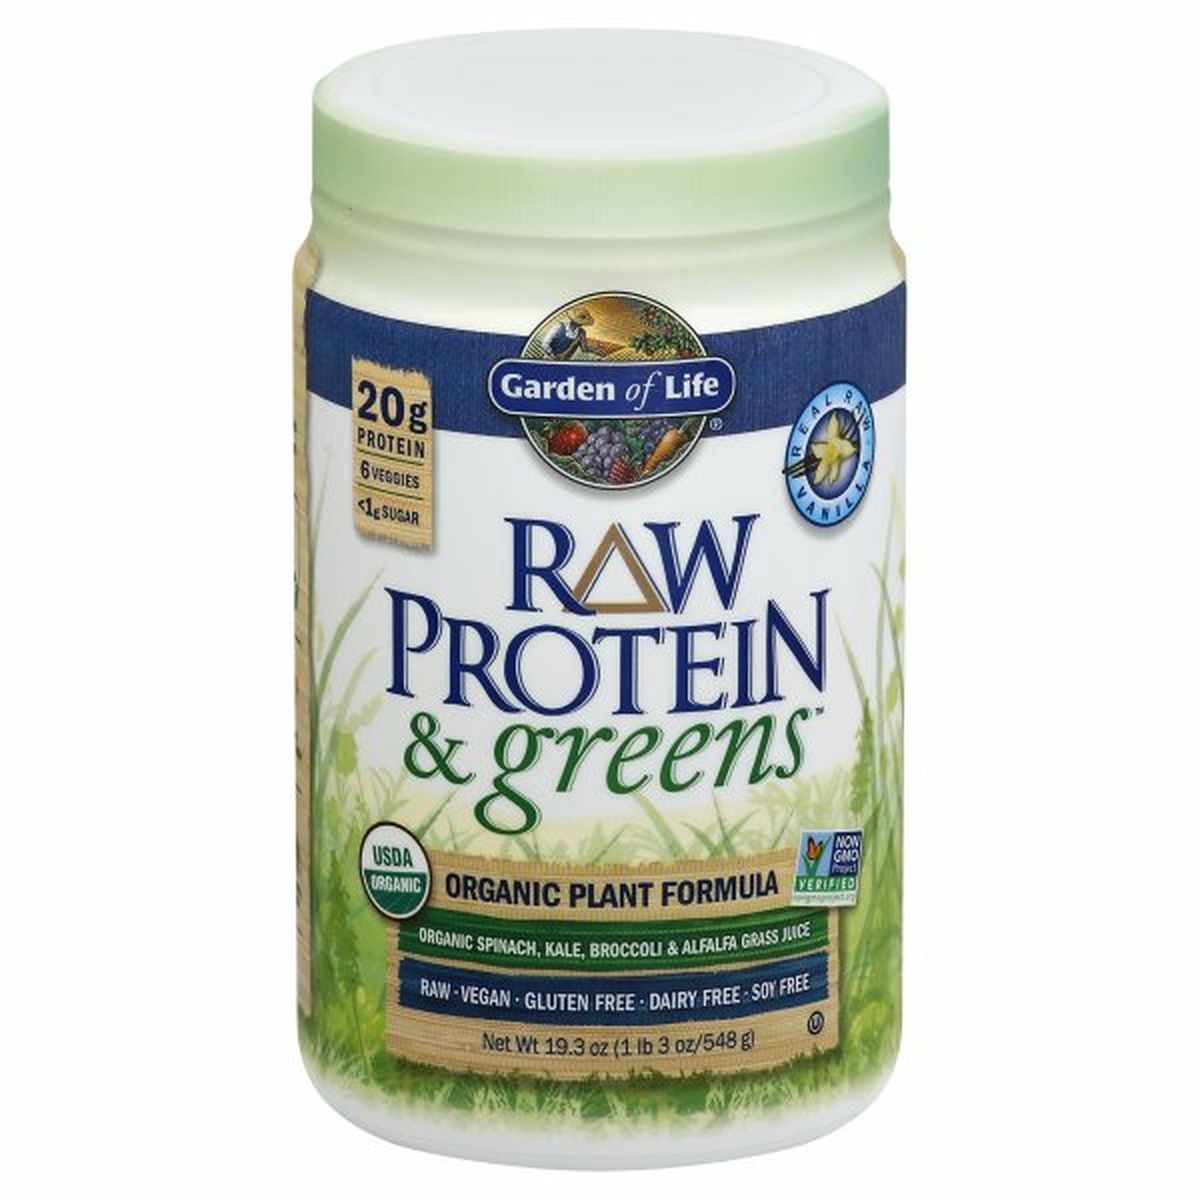 Calories in Garden of Life Raw Protein & Greens Plant Formula, Organic, Real Raw Vanilla